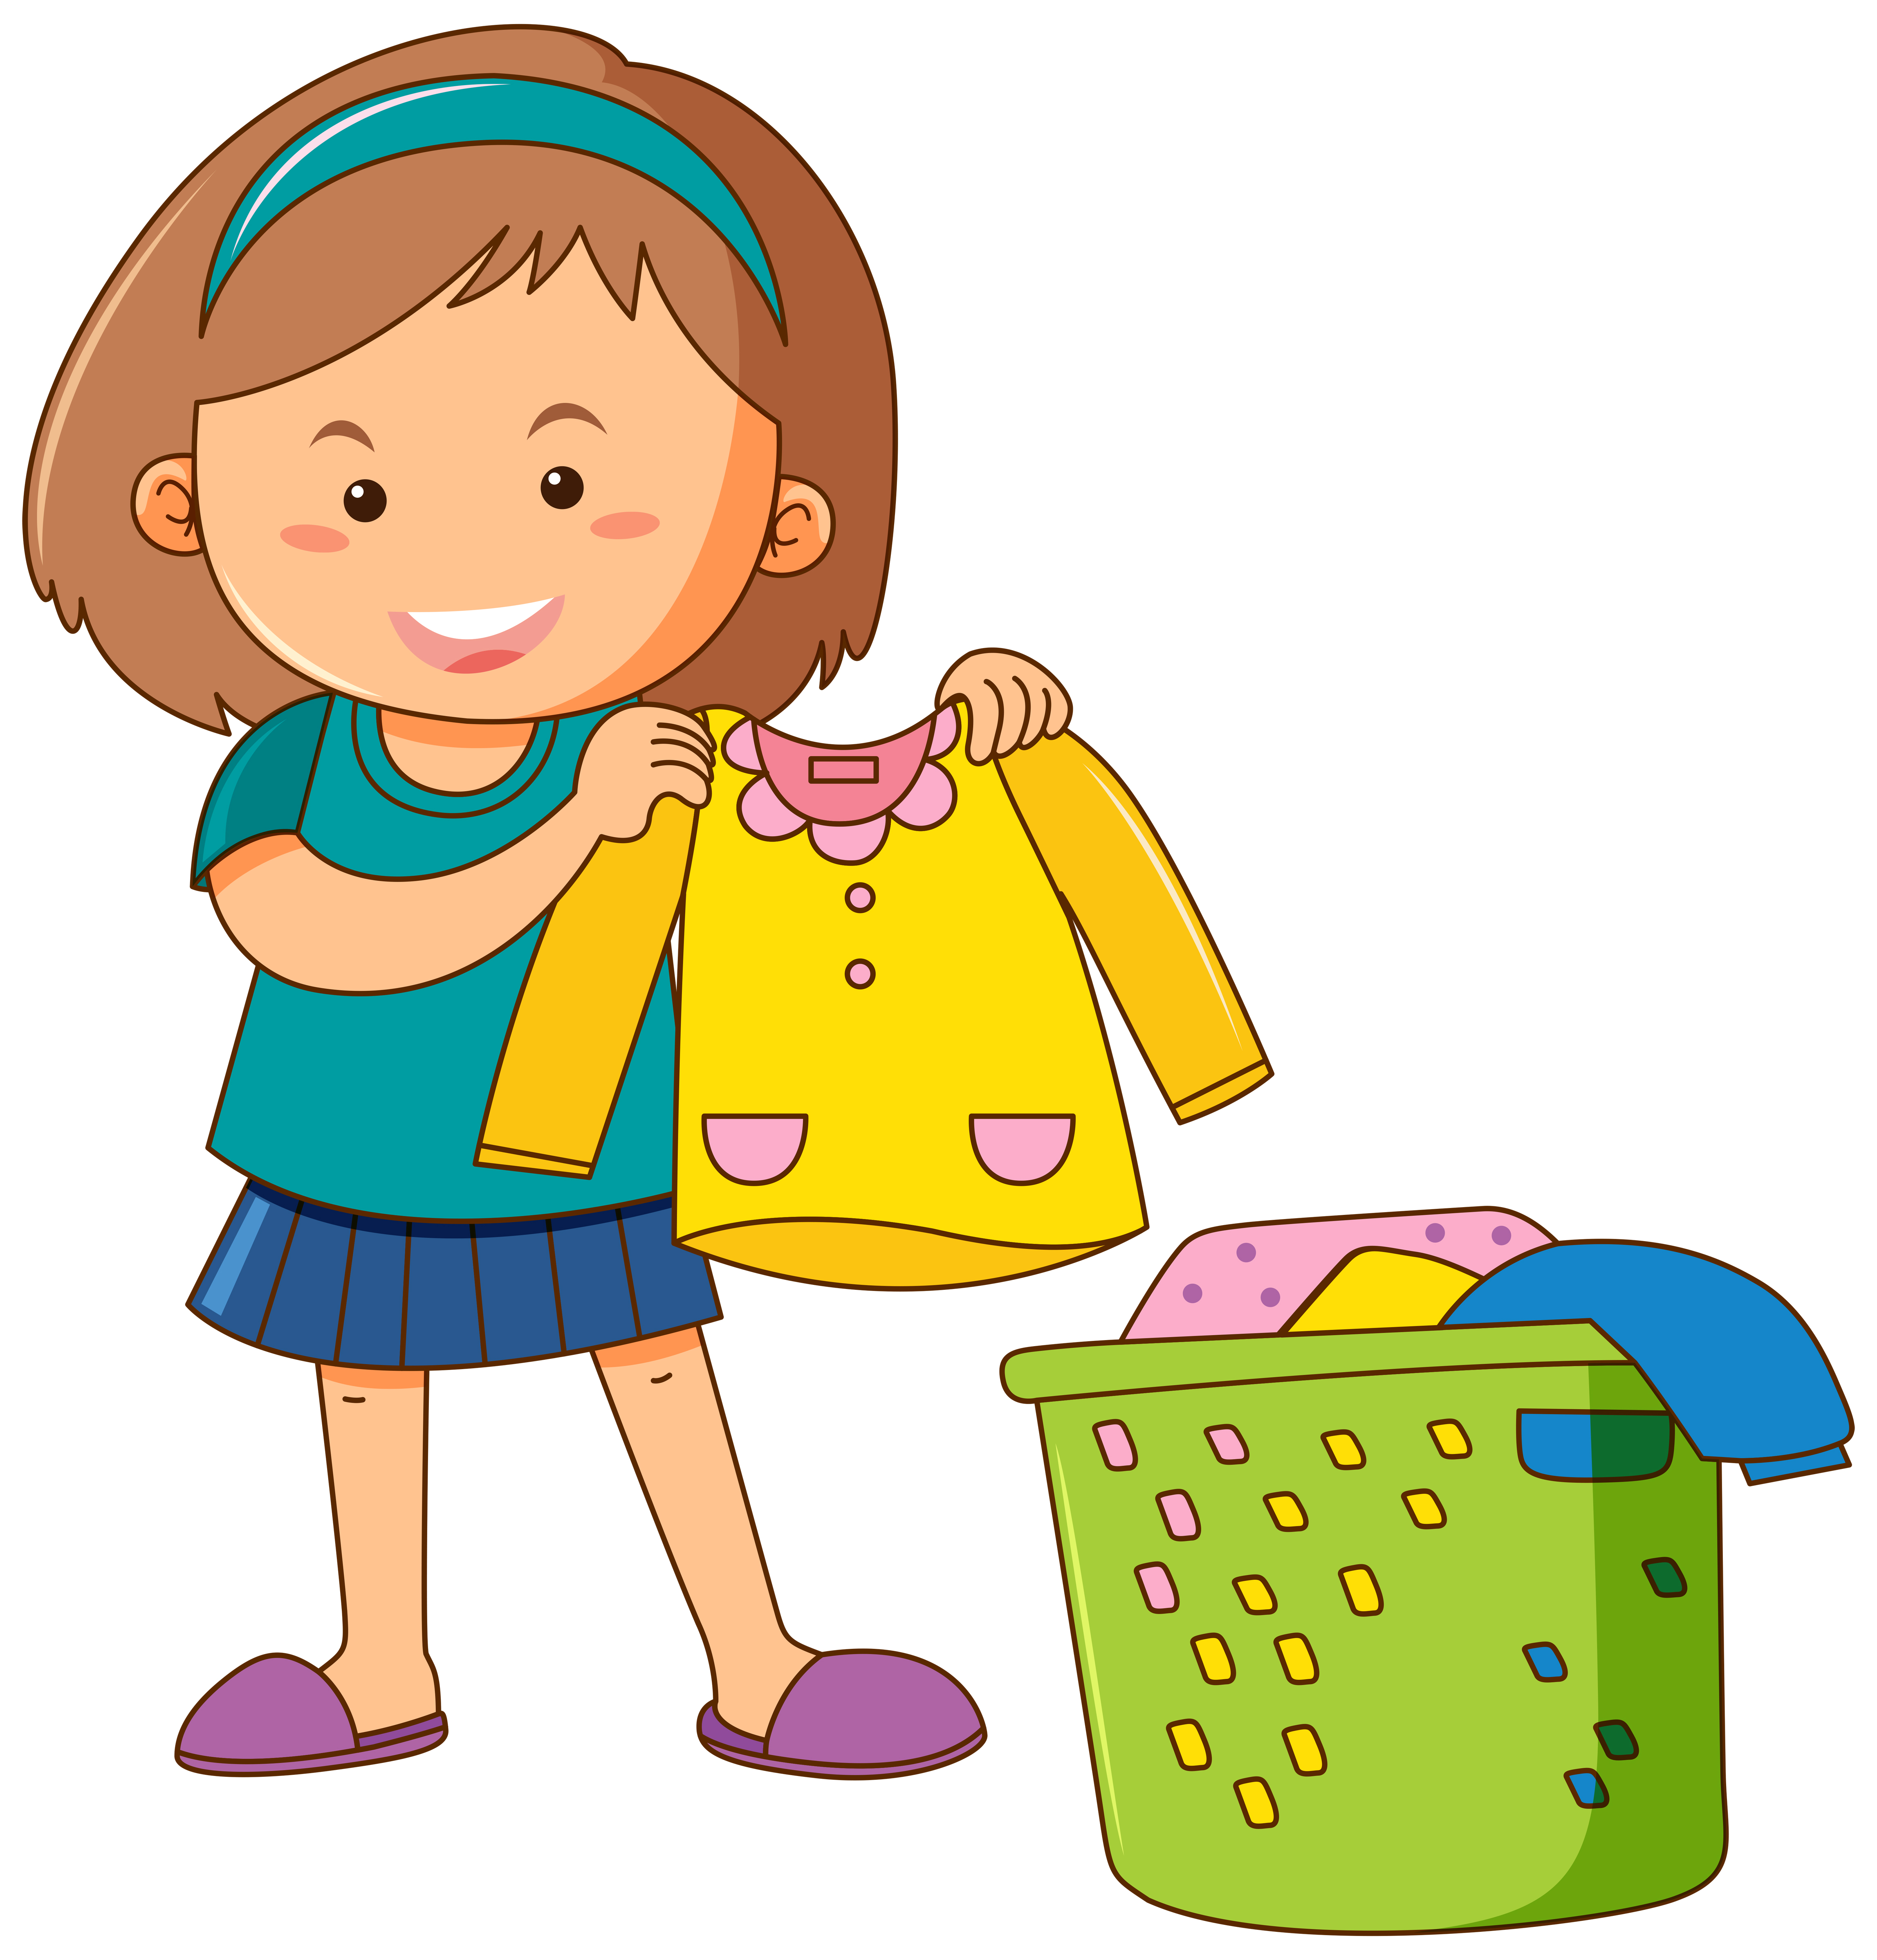 Little Girl Doing Laundry Download Free Vectors Clipart